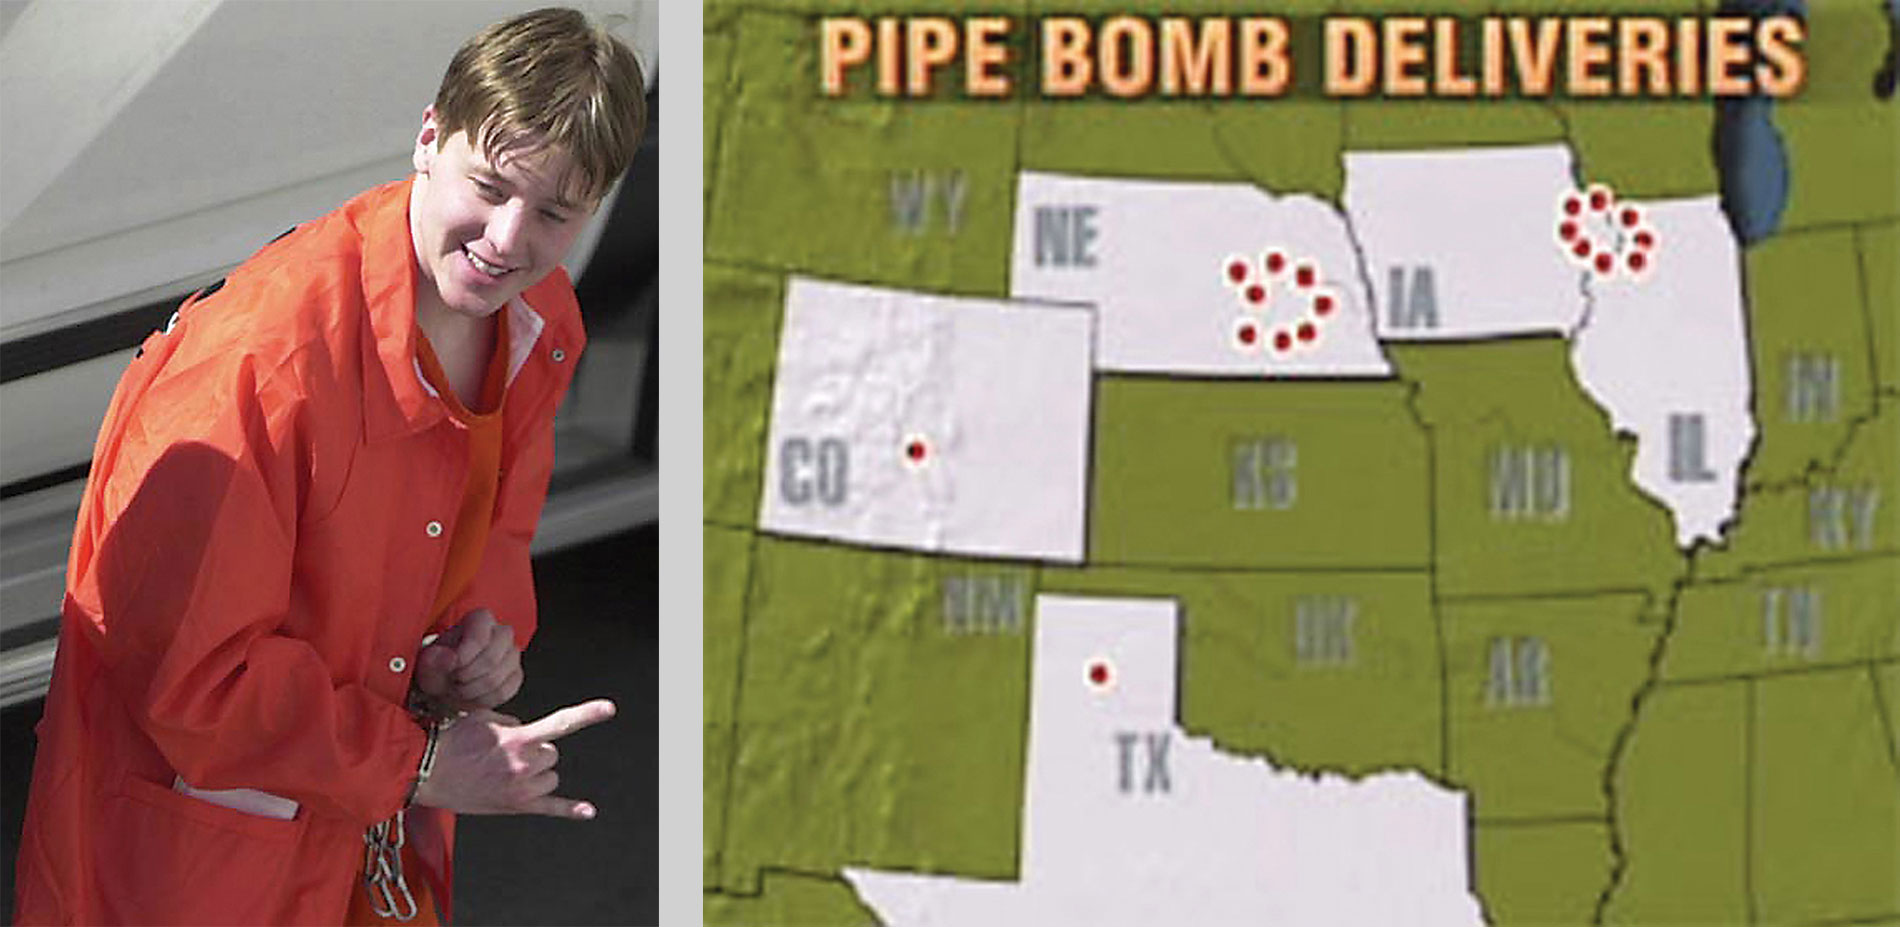 A photograph of Luke Helder, known as the “smiley face bomber,” and a map of his pipe bomb deliveries.